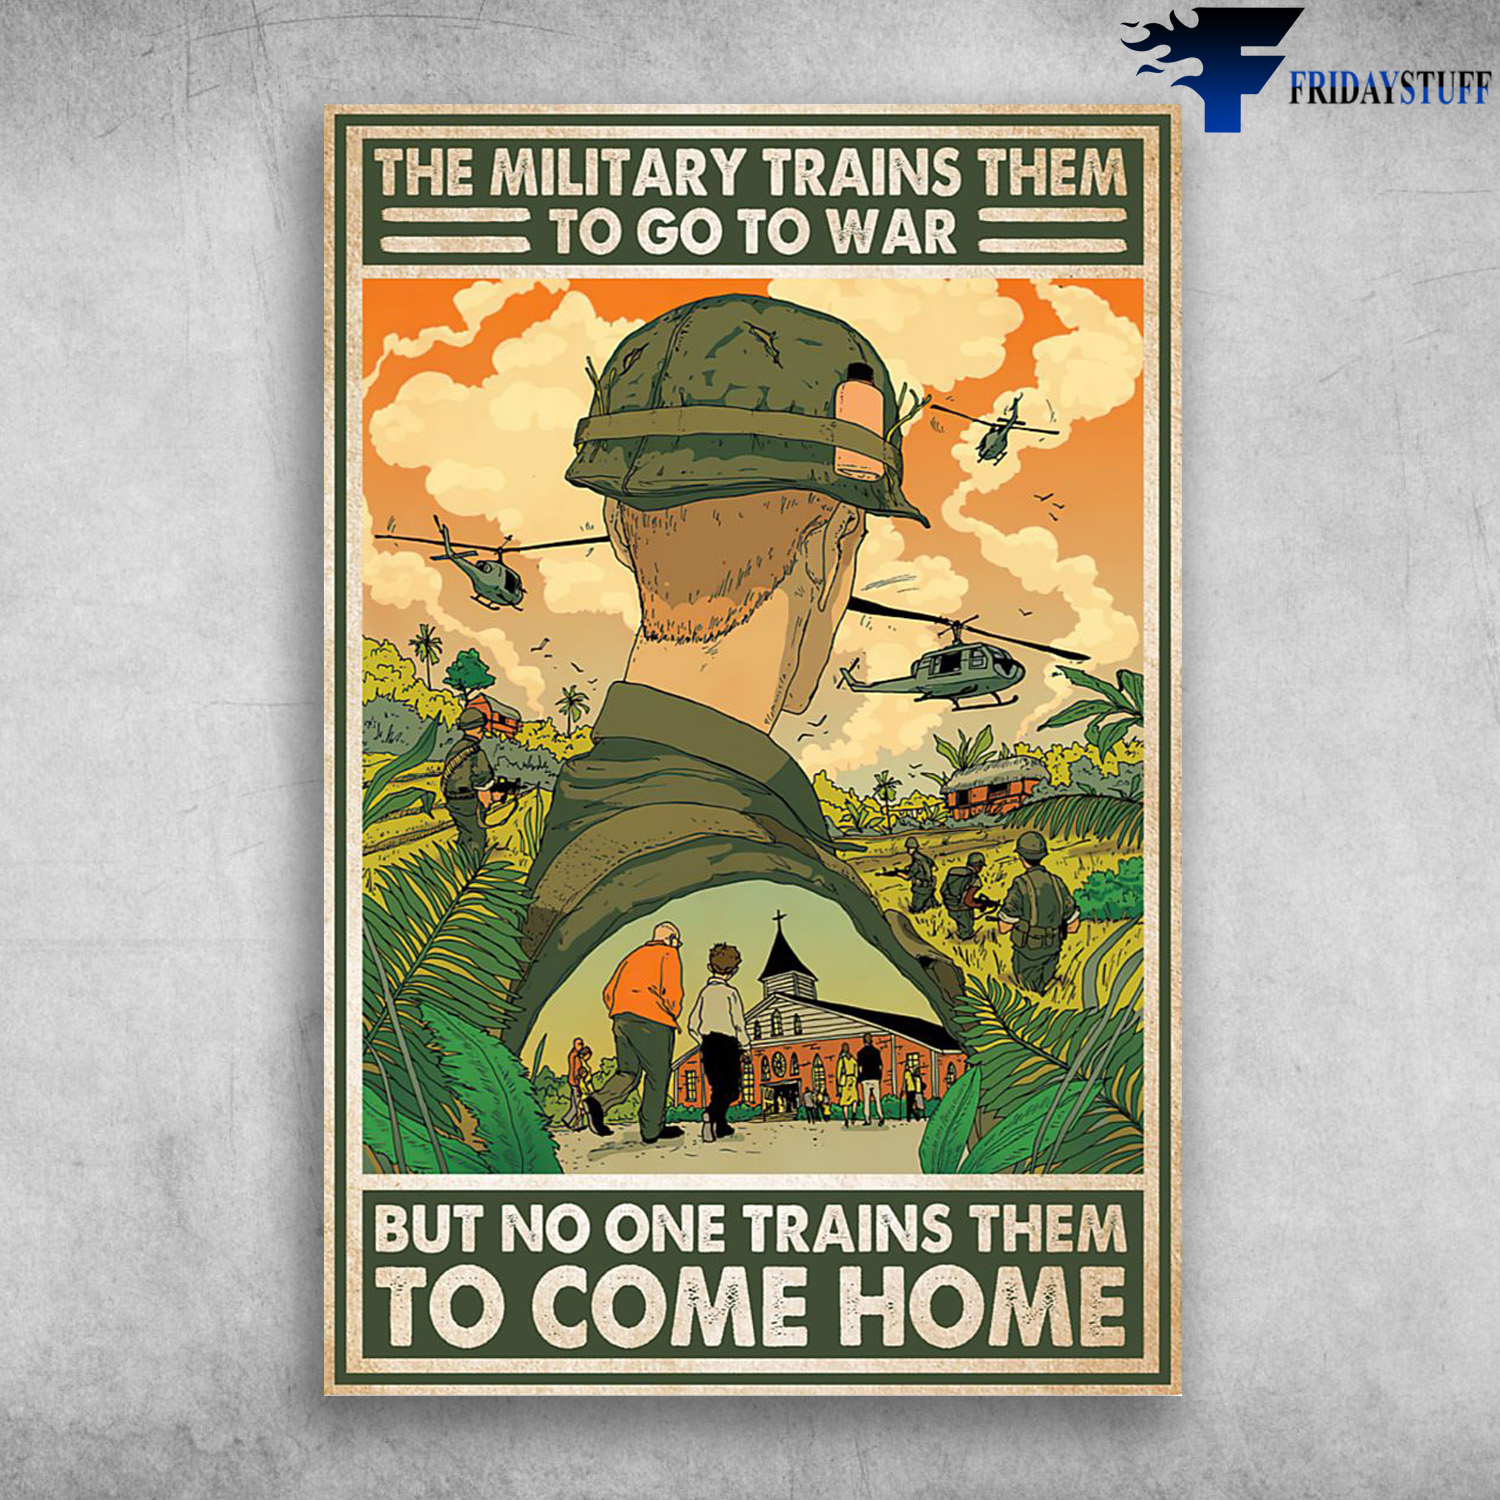 Soldier In War - The Miltaty Trains Them, To Go To War, But No One Trains Them, To Come Home